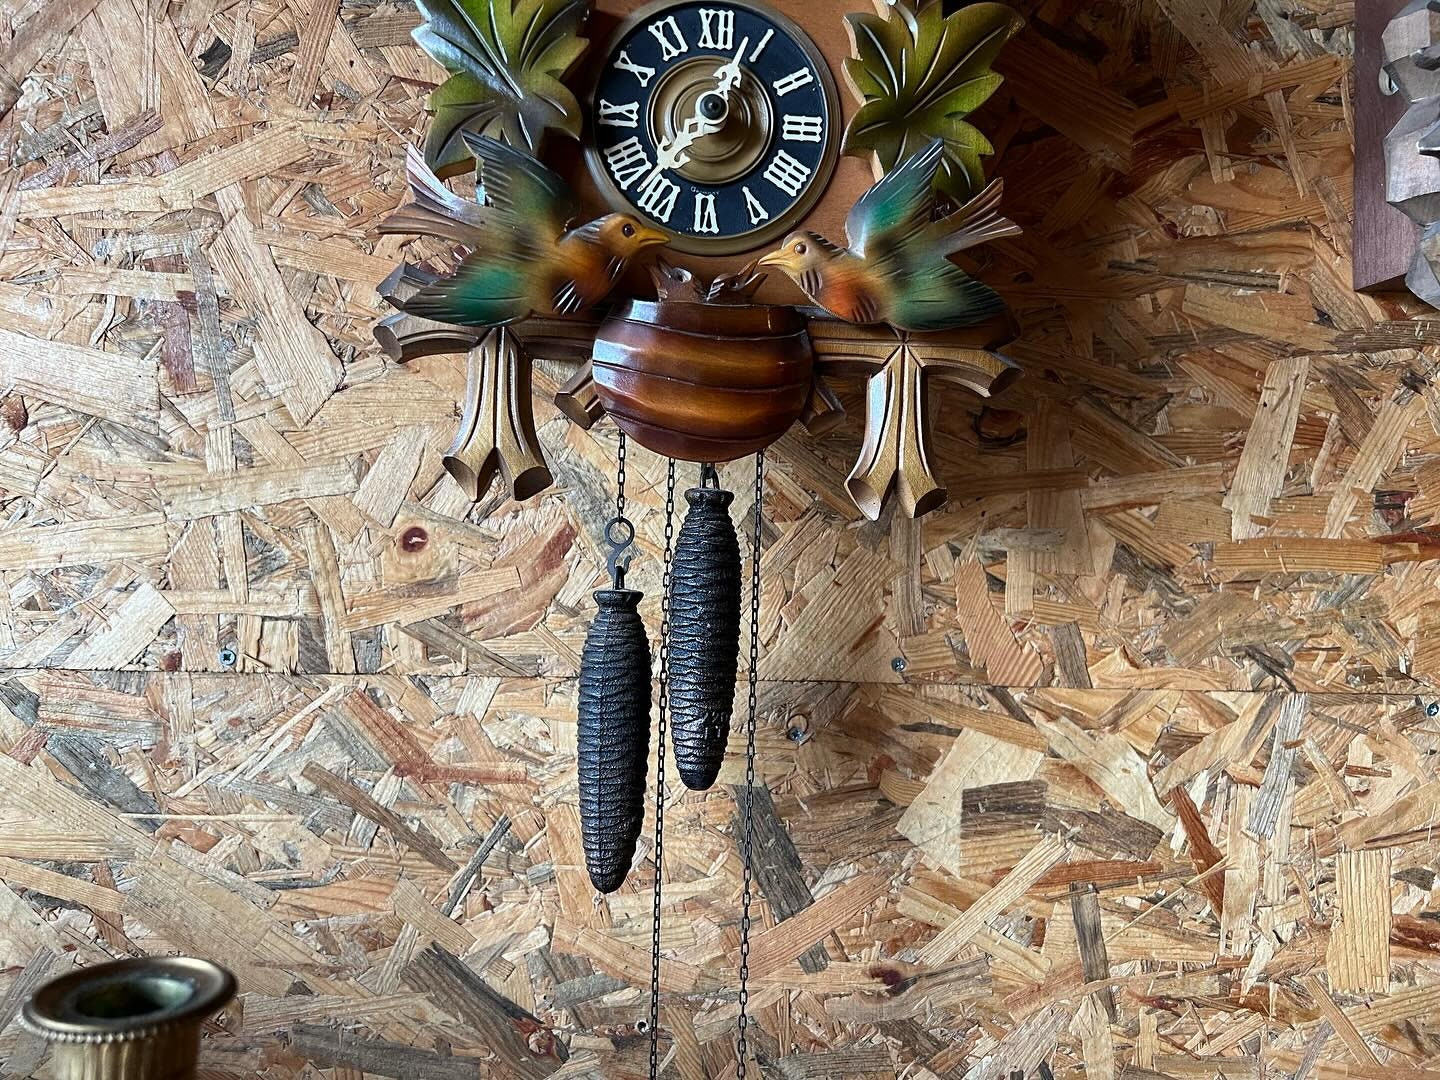 Collectible!! Antique German-Made Large Animated Cuckoo Clock | Flawless Condition | Moving Chicks